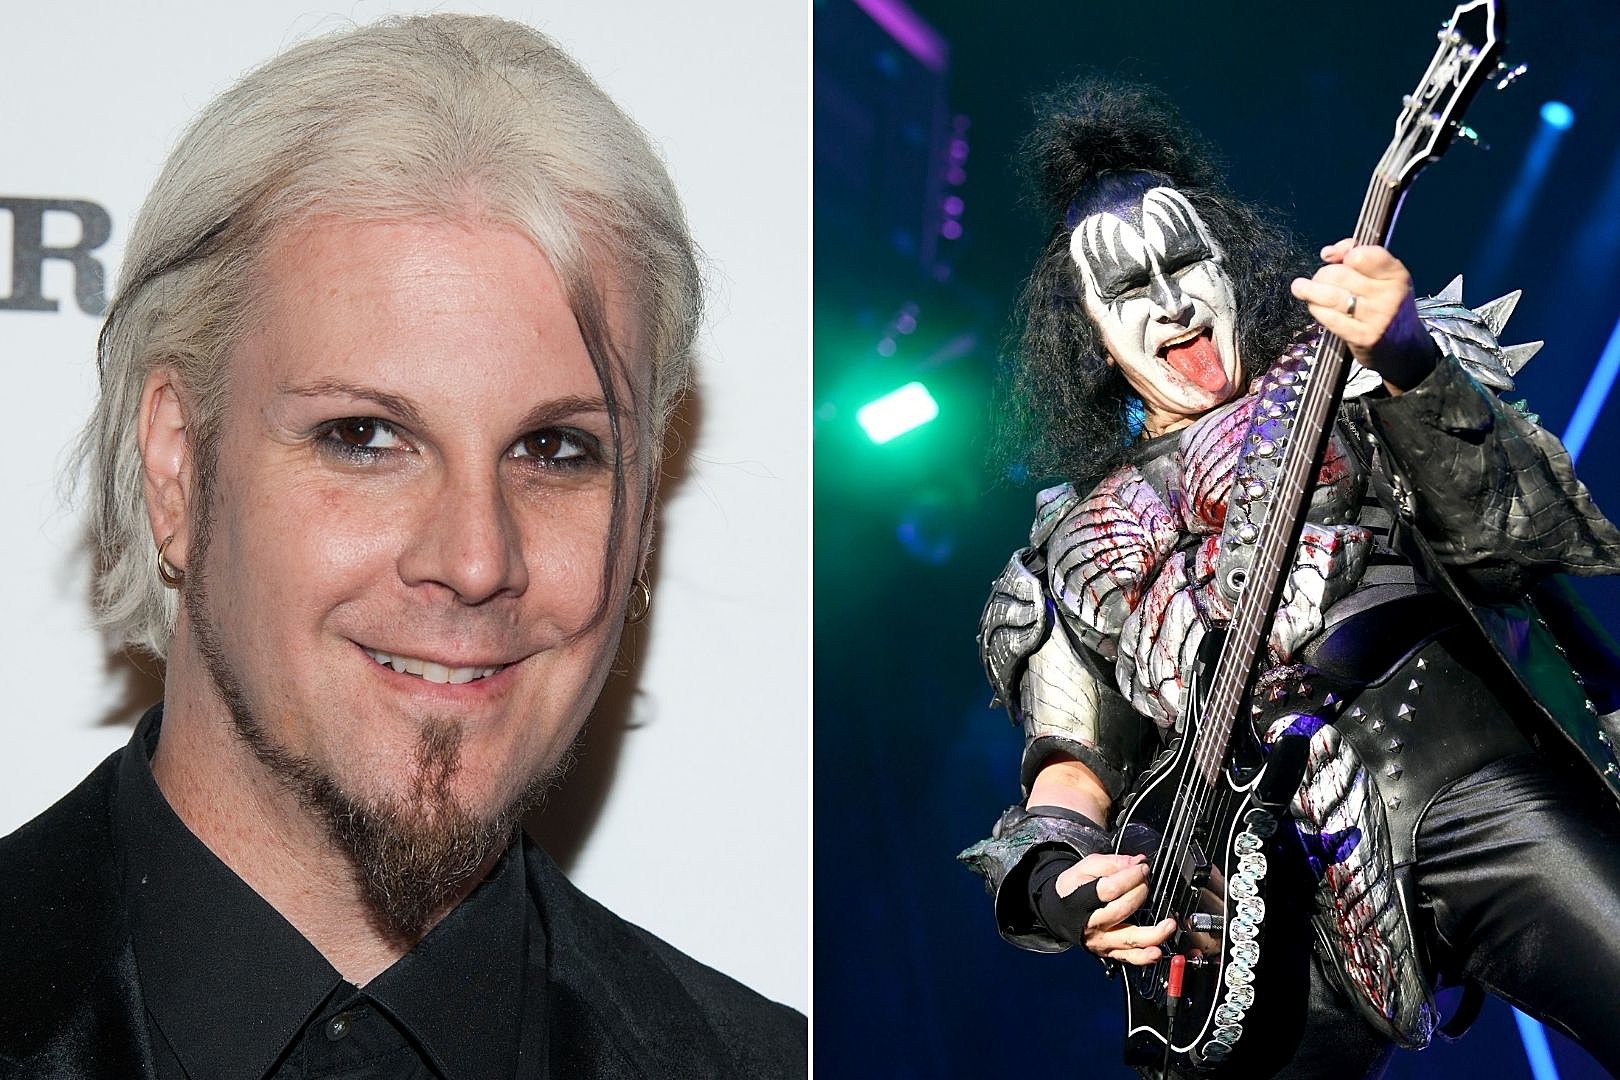 John 5 Chickened Out of Asking for Gene Simmons’ Autograph